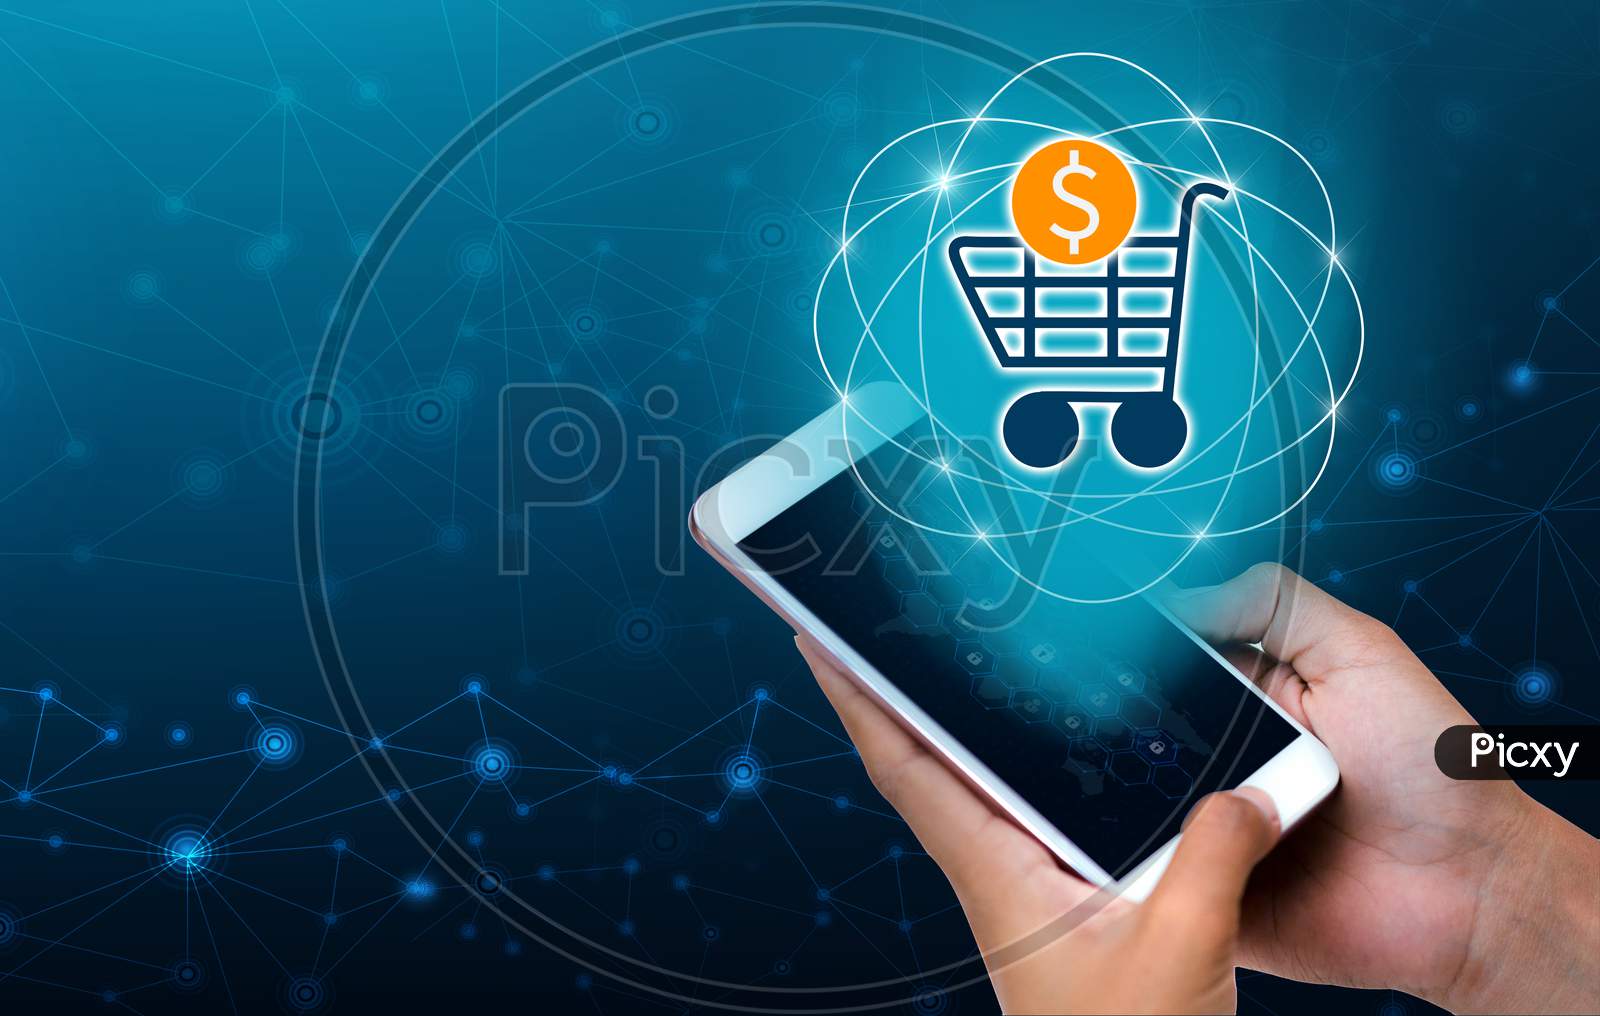 Transactio Payment Technology Making Online Mobile Phone Phone Hand Businesspeople Press The Phone To Order Or Pay In The Internet.Payment Internet Shop Makes Online Shopping